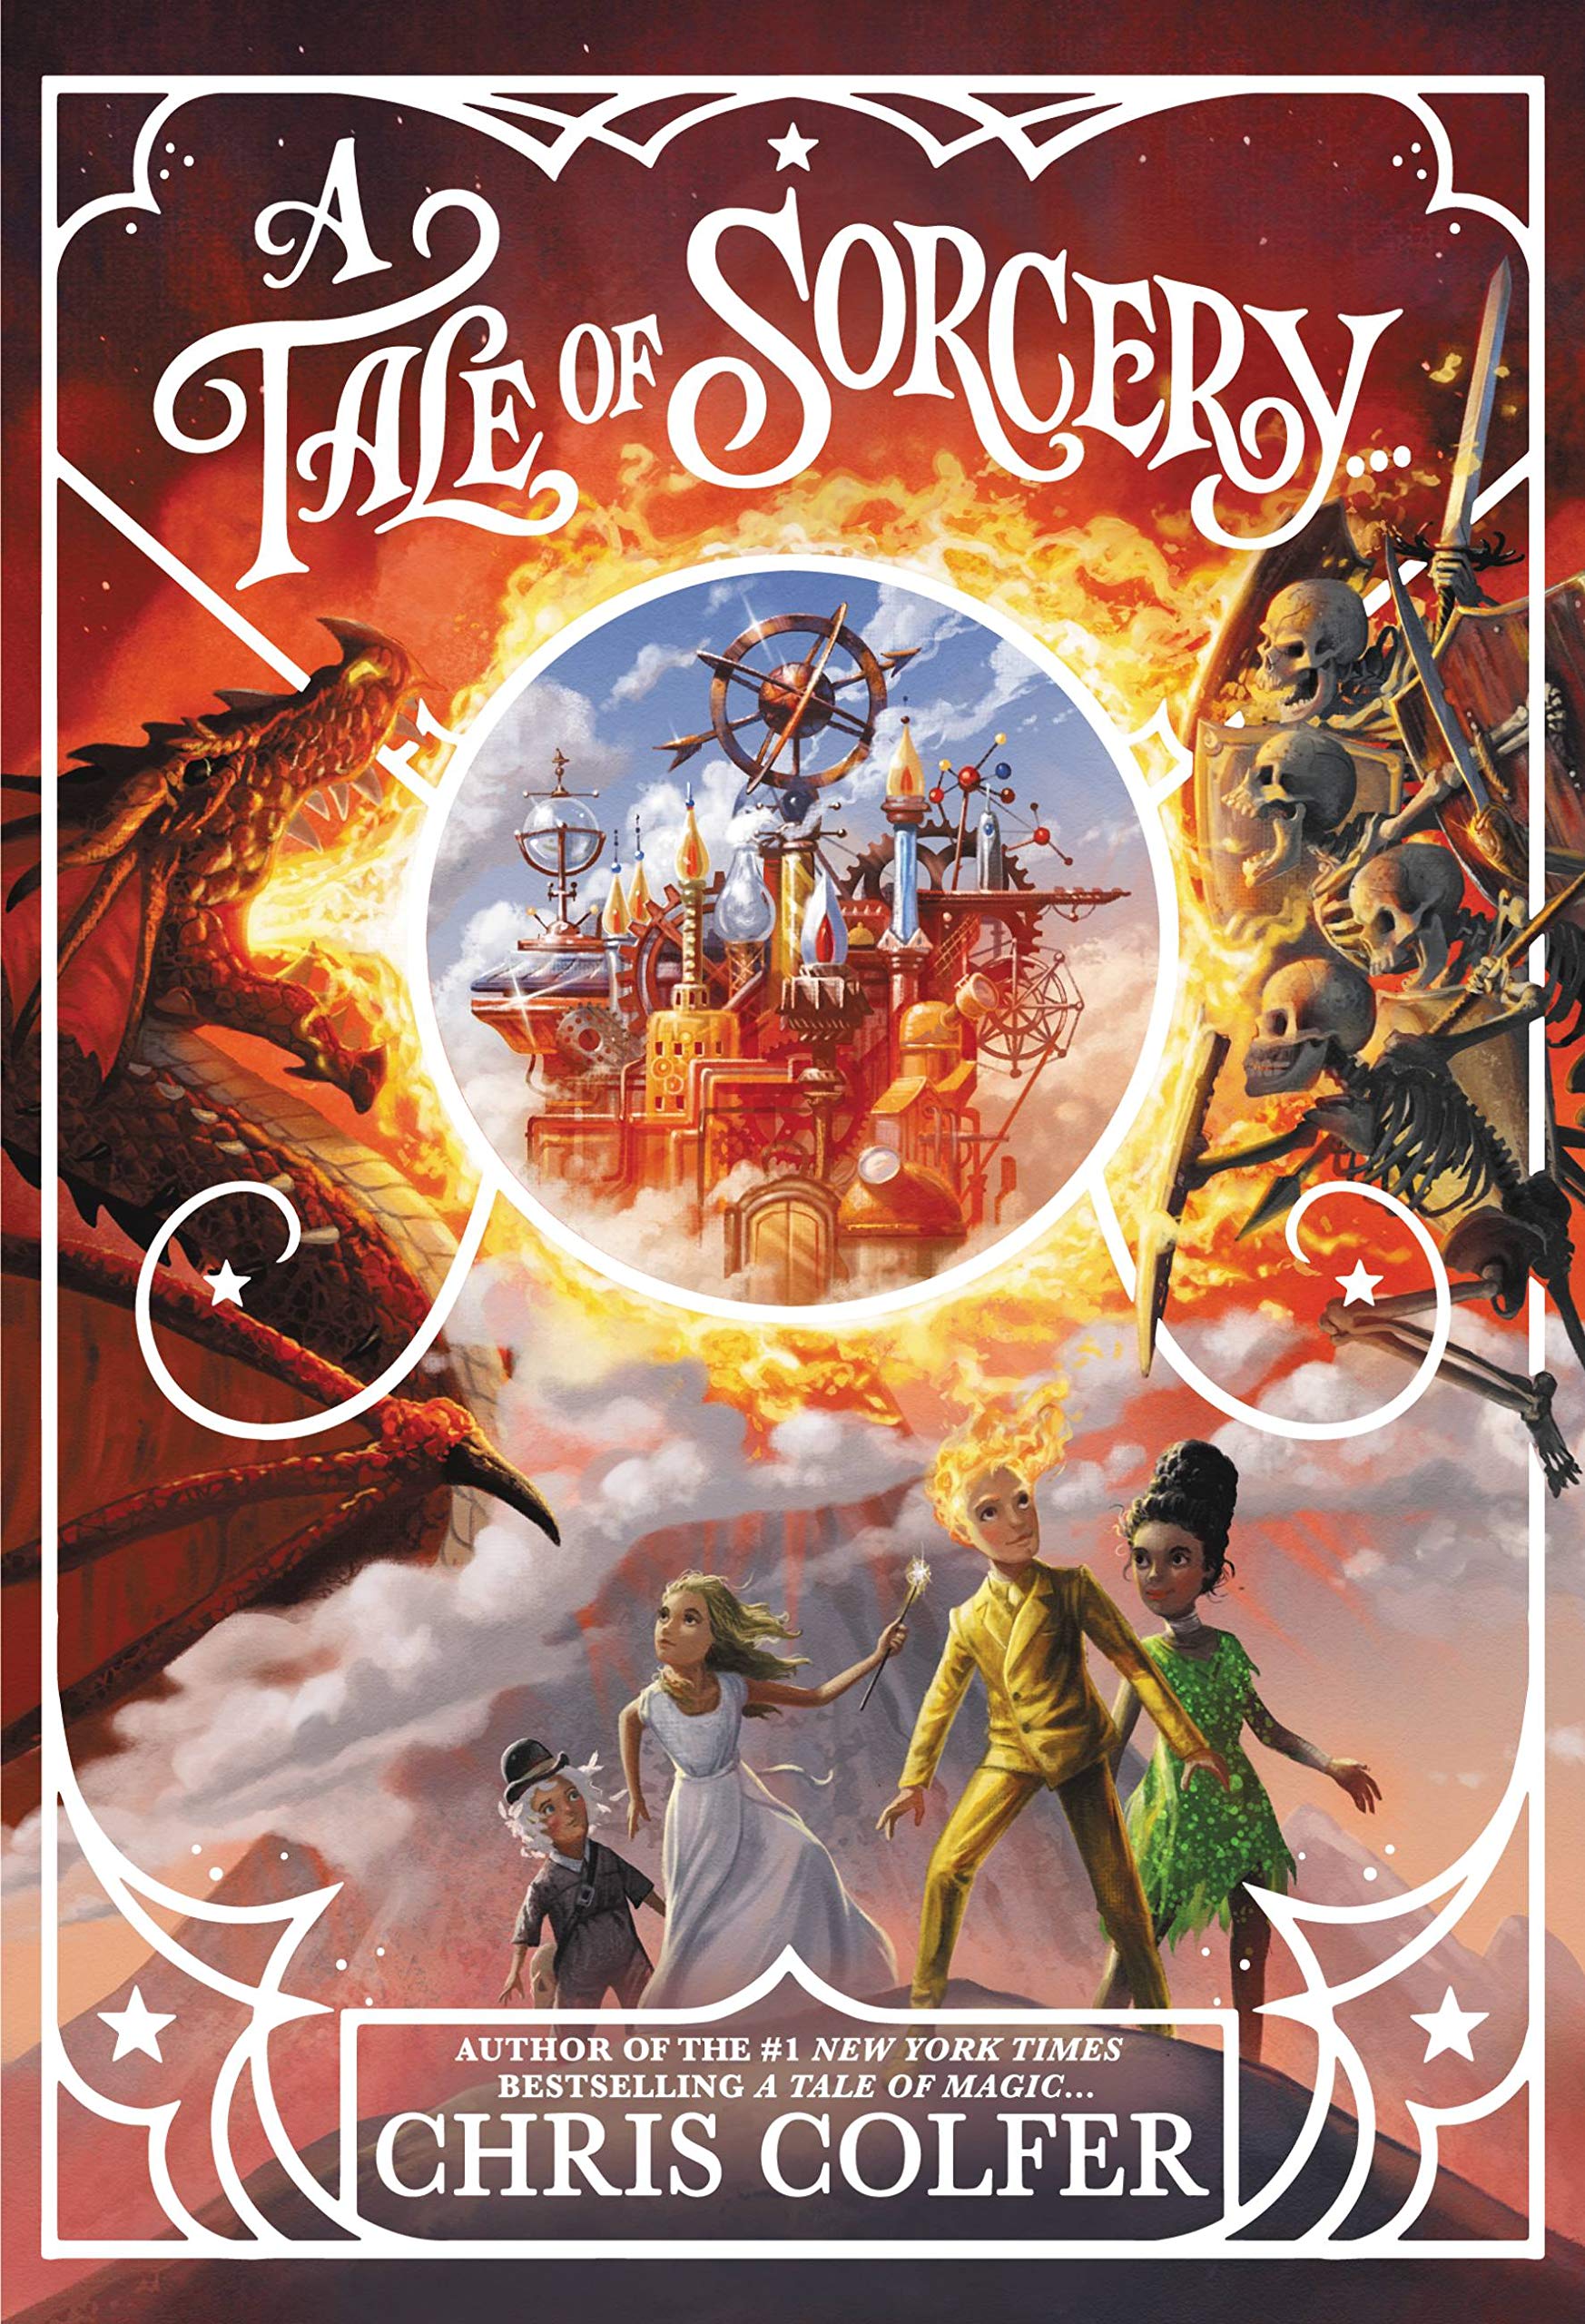 A Tale of Sorcery . . . (A Tale of Magic #3) by Chris Colfer